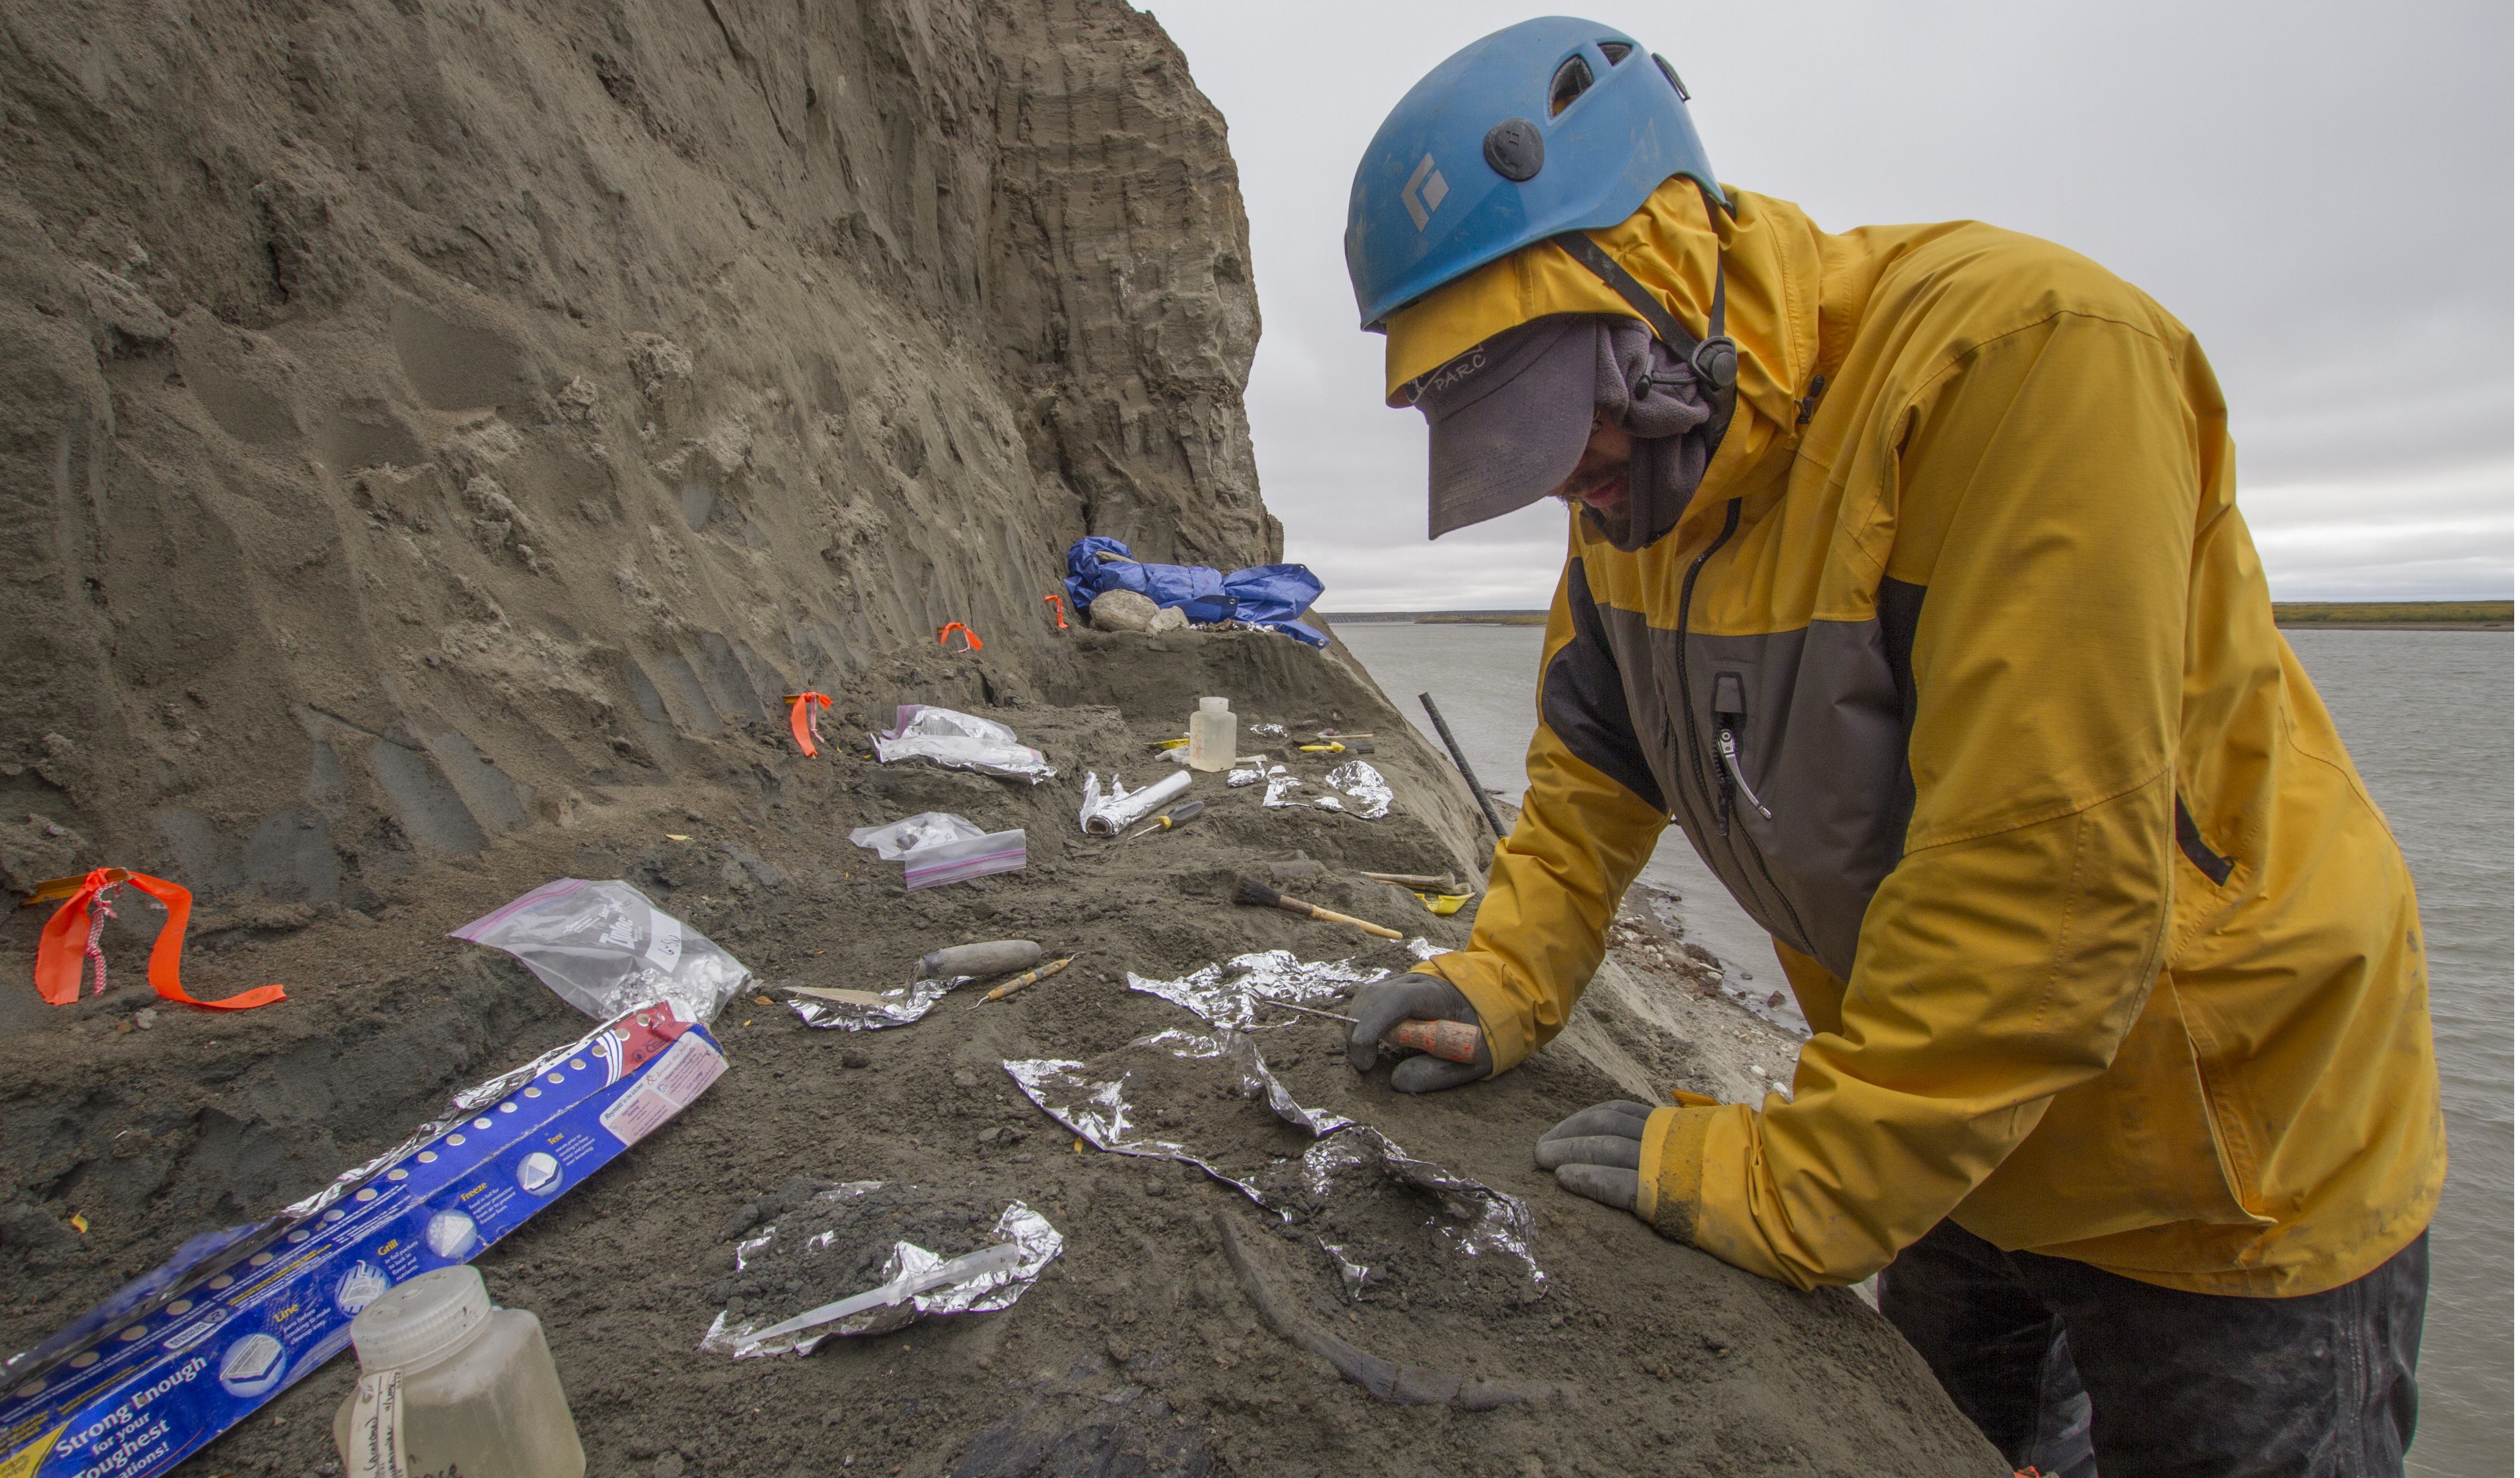 Photo by Roger Topp. Paul Gignac, an assistant professor at Oklahoma State University, works at a site along the Colville River where teams from the University of Alaska Museum of the North have collected dinosaur fossils since the late 1980s.